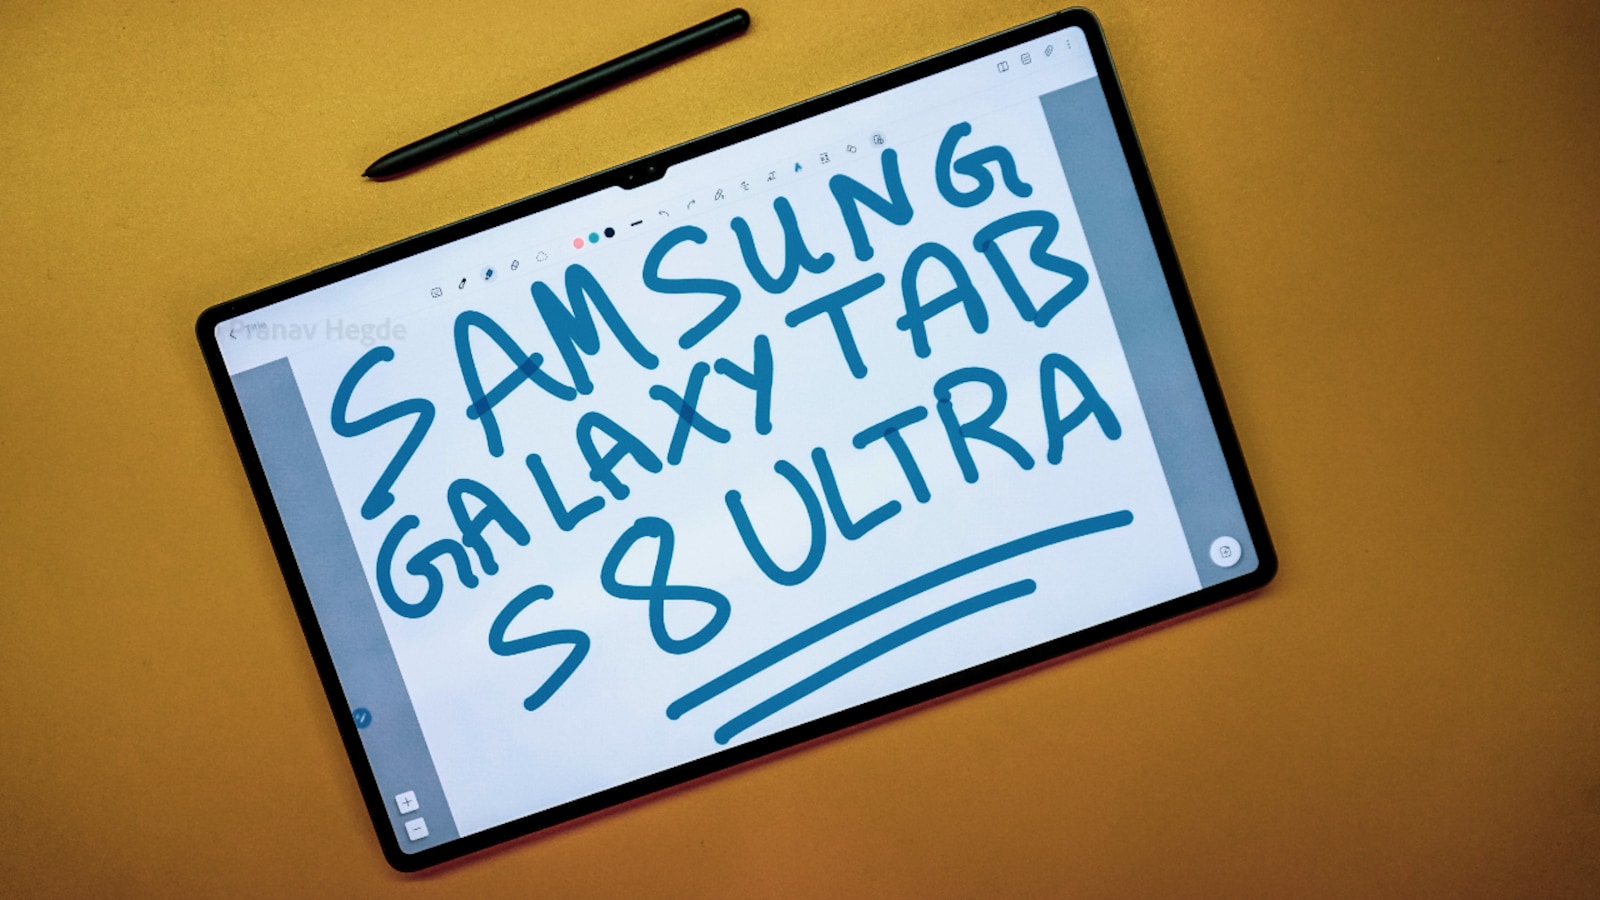 https://images.moneycontrol.com/static-mcnews/2022/03/Samsung-Galaxy-Tab-S8-Ultra-4.jpg?impolicy=website&width=1600&height=900